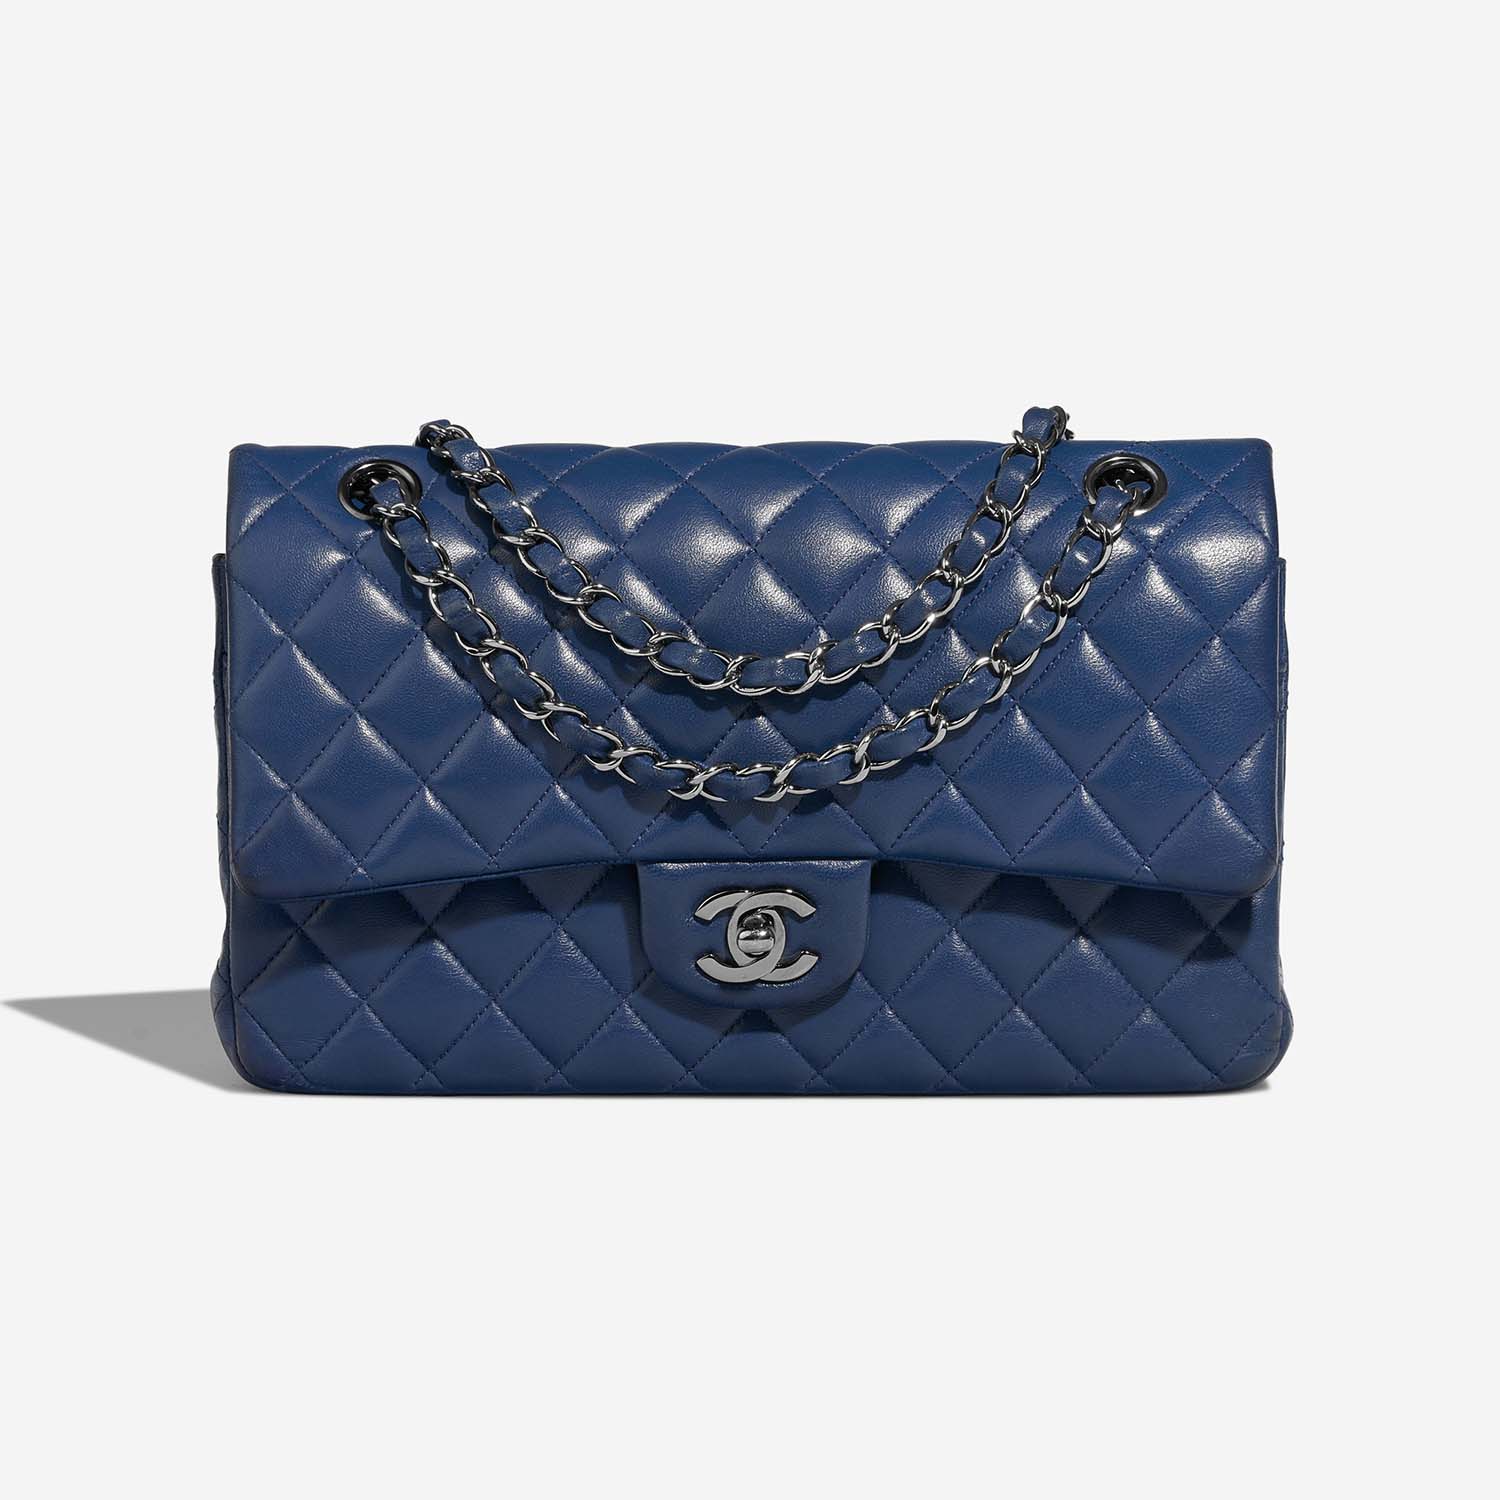 Chanel - Authenticated Timeless/Classique Handbag - Leather Blue Plain for Women, Very Good Condition